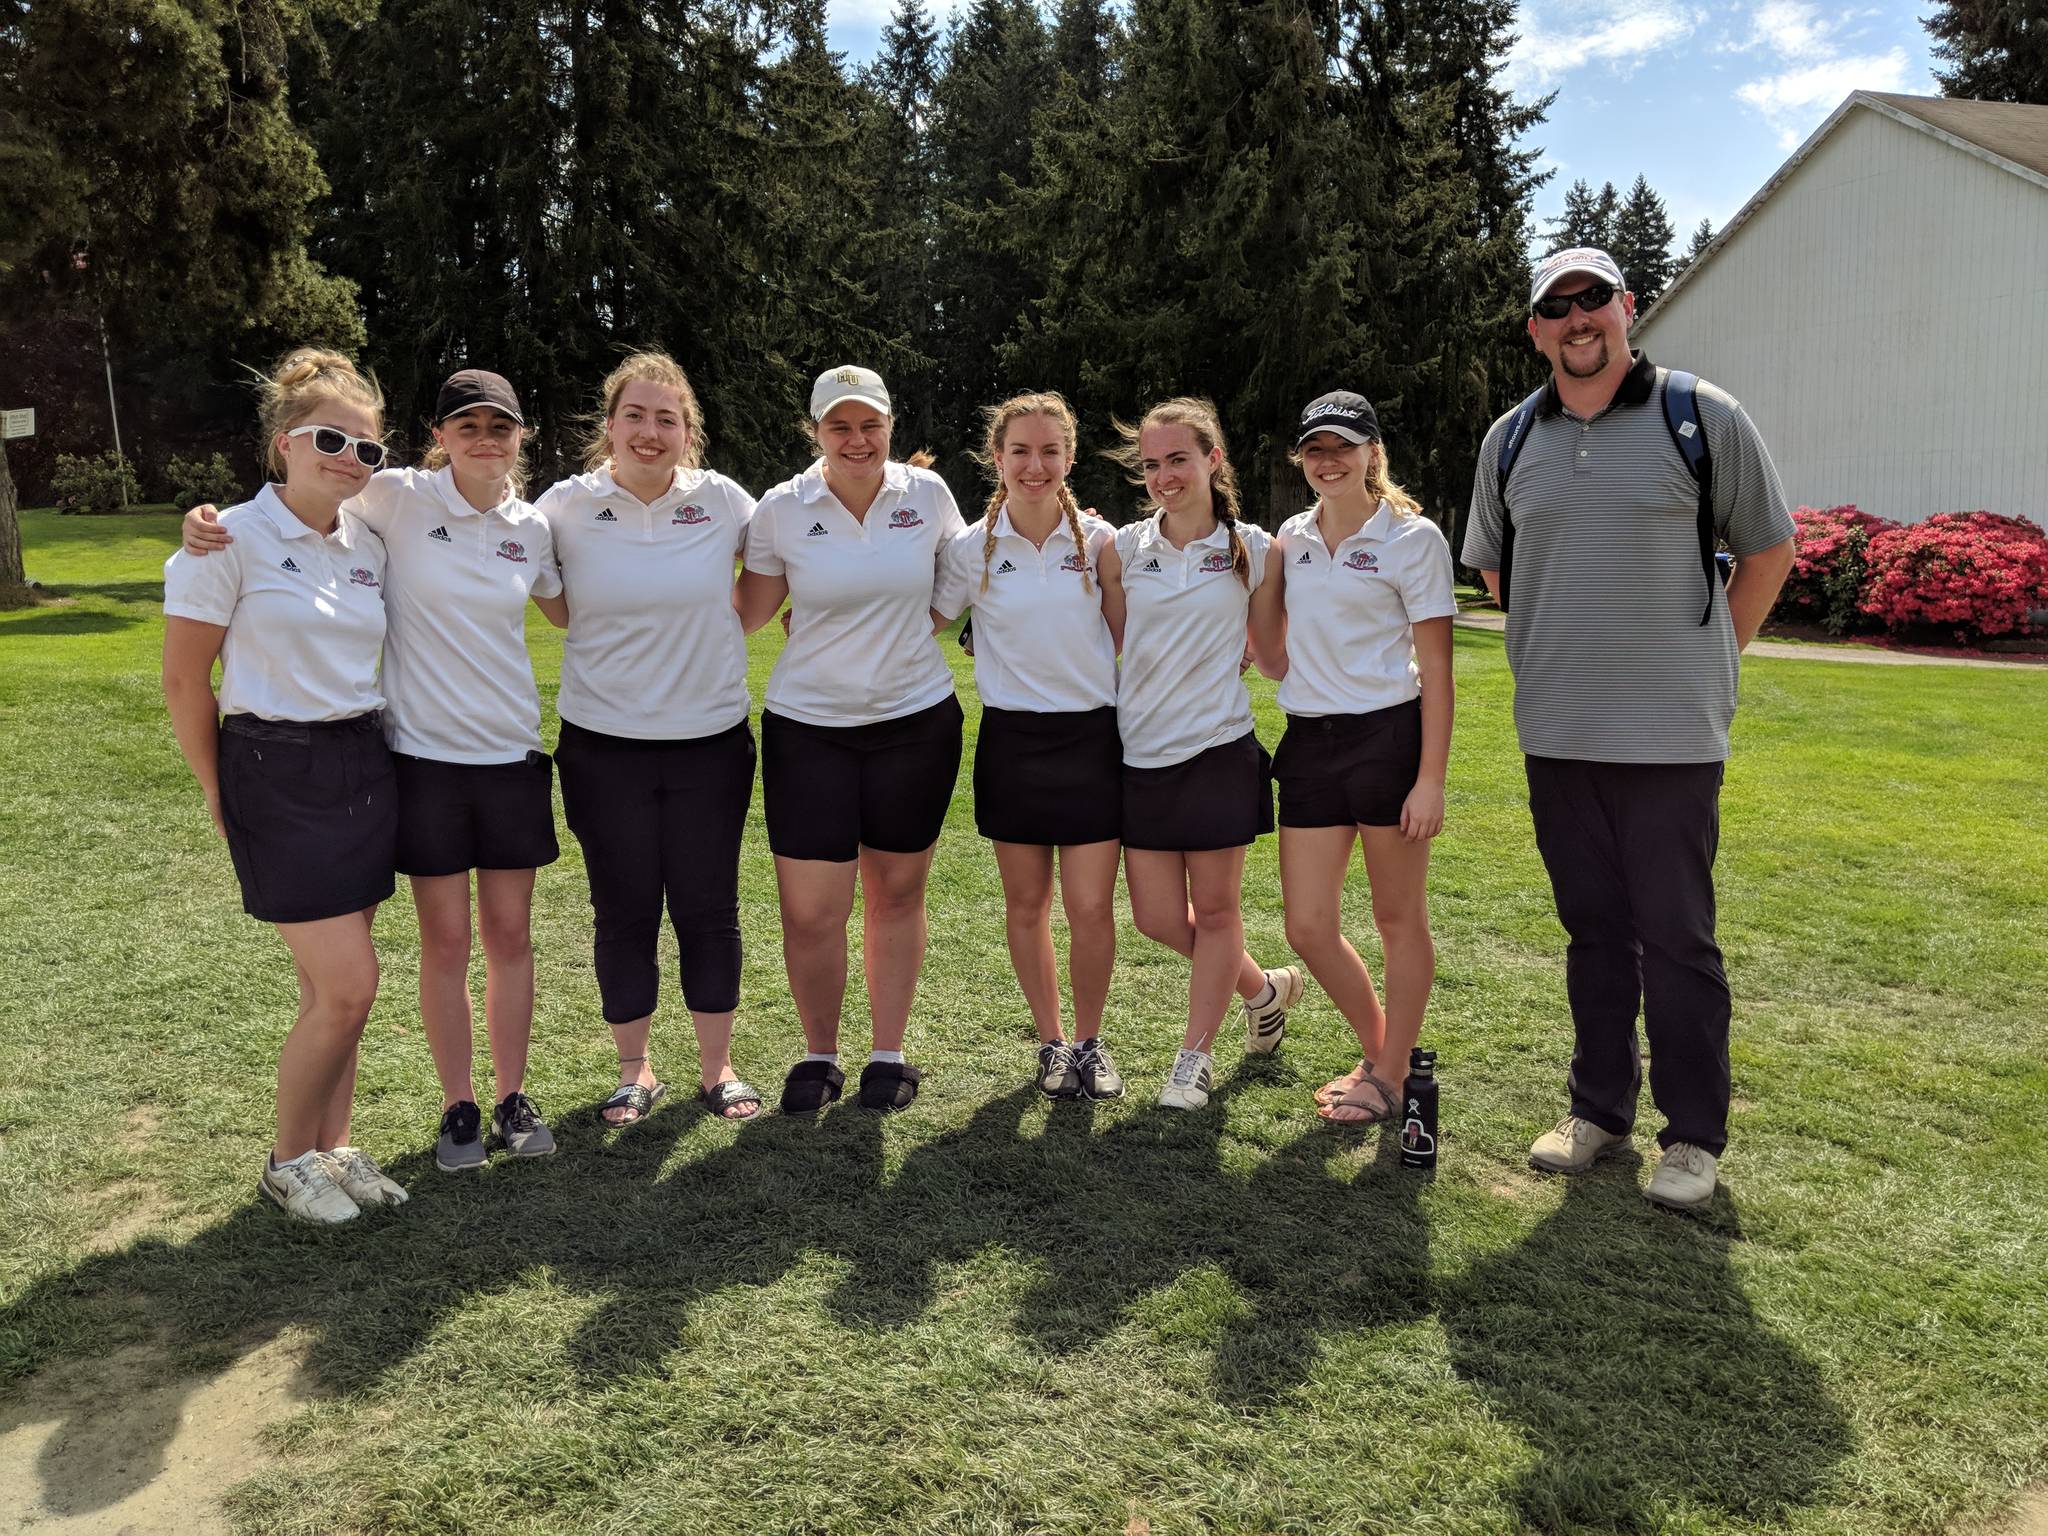 Mount Si golfers earned third place in the 4A District 2 state-qualifier tournament on May 9 at Snohomish Golf Course. Kat Hodgson and Tori Berger advanced to state, which will be held on May 22-23 at Sun Willows Golf Course in Pasco. Hodgson finished third overall and Berger is the second alternate from district and tied 11th overall. Annie Burns and Alli Miller also golfed at districts. On May 8, the team placed third in the 4A KingCo medalist tournament. Hodgson finished tied for fifth overall and also earned first-team all-KingCo honors, Berger earned second-team honors and Burns earned honorable mention. Mount Si golfers pictured at the medalist tournament are, from left, Emma Fougere, Berger, Miller, Burns, Dana Kenow, Lindsay Silverman and Hodgson along with coach Steve Botulinski. Courtesy photo